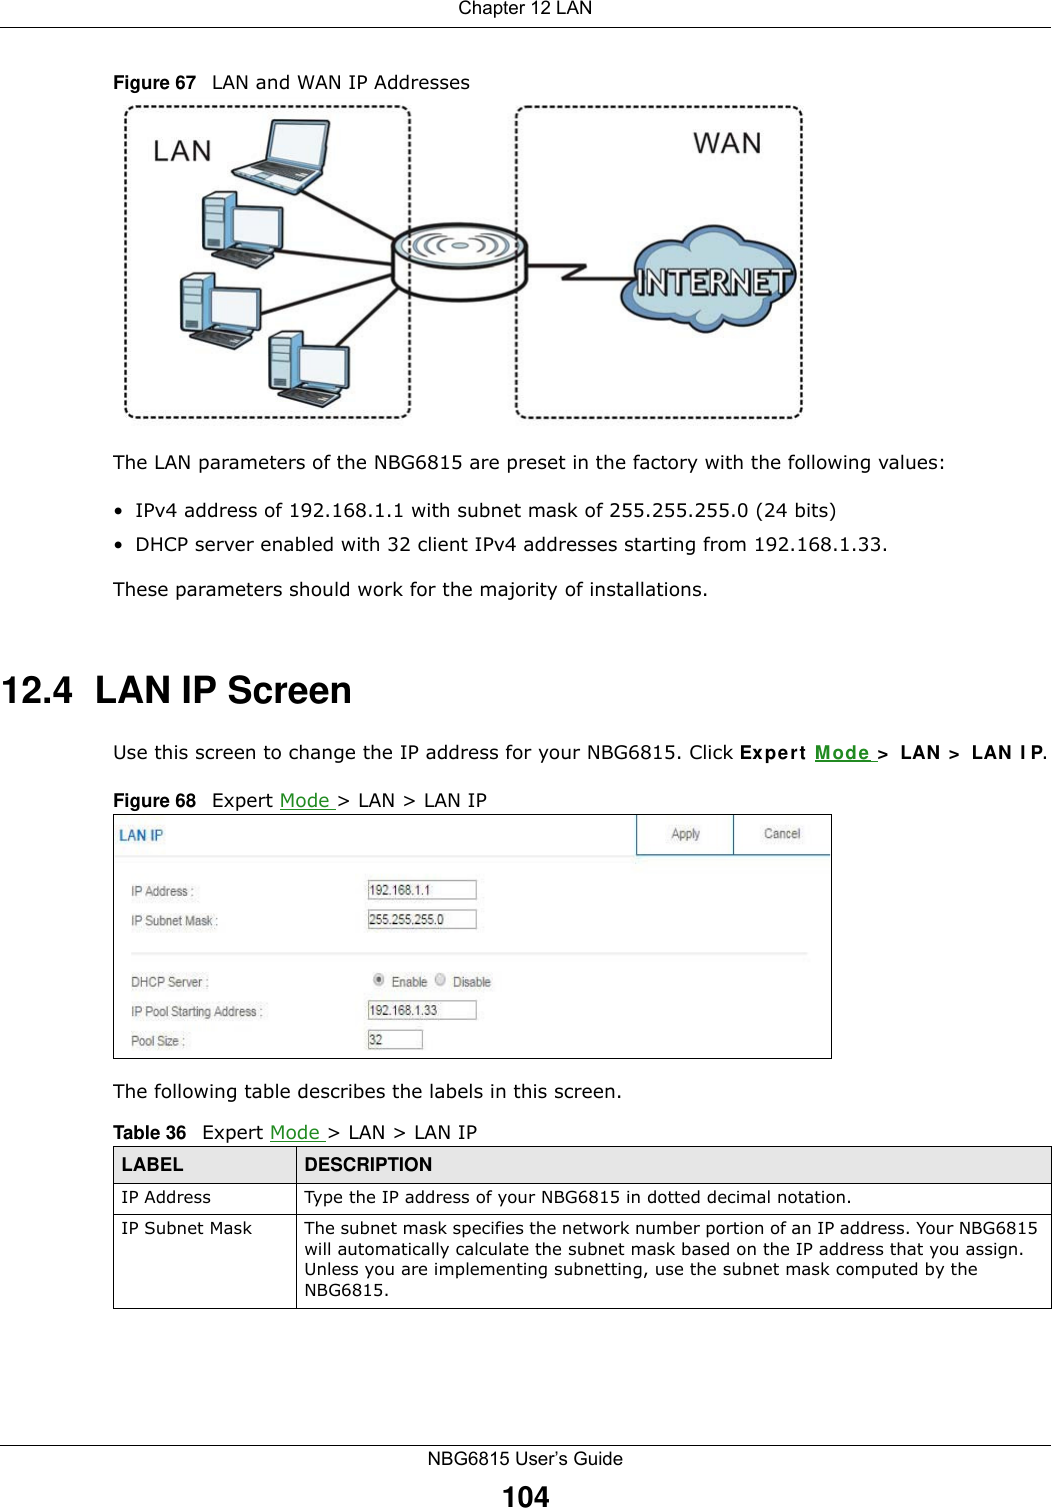 Chapter 12 LANNBG6815 User’s Guide104Figure 67   LAN and WAN IP AddressesThe LAN parameters of the NBG6815 are preset in the factory with the following values:• IPv4 address of 192.168.1.1 with subnet mask of 255.255.255.0 (24 bits)• DHCP server enabled with 32 client IPv4 addresses starting from 192.168.1.33. These parameters should work for the majority of installations.12.4  LAN IP ScreenUse this screen to change the IP address for your NBG6815. Click Expert Mode &gt; LAN &gt; LAN IP.Figure 68   Expert Mode &gt; LAN &gt; LAN IP The following table describes the labels in this screen.Table 36   Expert Mode &gt; LAN &gt; LAN IPLABEL DESCRIPTIONIP Address Type the IP address of your NBG6815 in dotted decimal notation.IP Subnet Mask The subnet mask specifies the network number portion of an IP address. Your NBG6815 will automatically calculate the subnet mask based on the IP address that you assign. Unless you are implementing subnetting, use the subnet mask computed by the NBG6815.